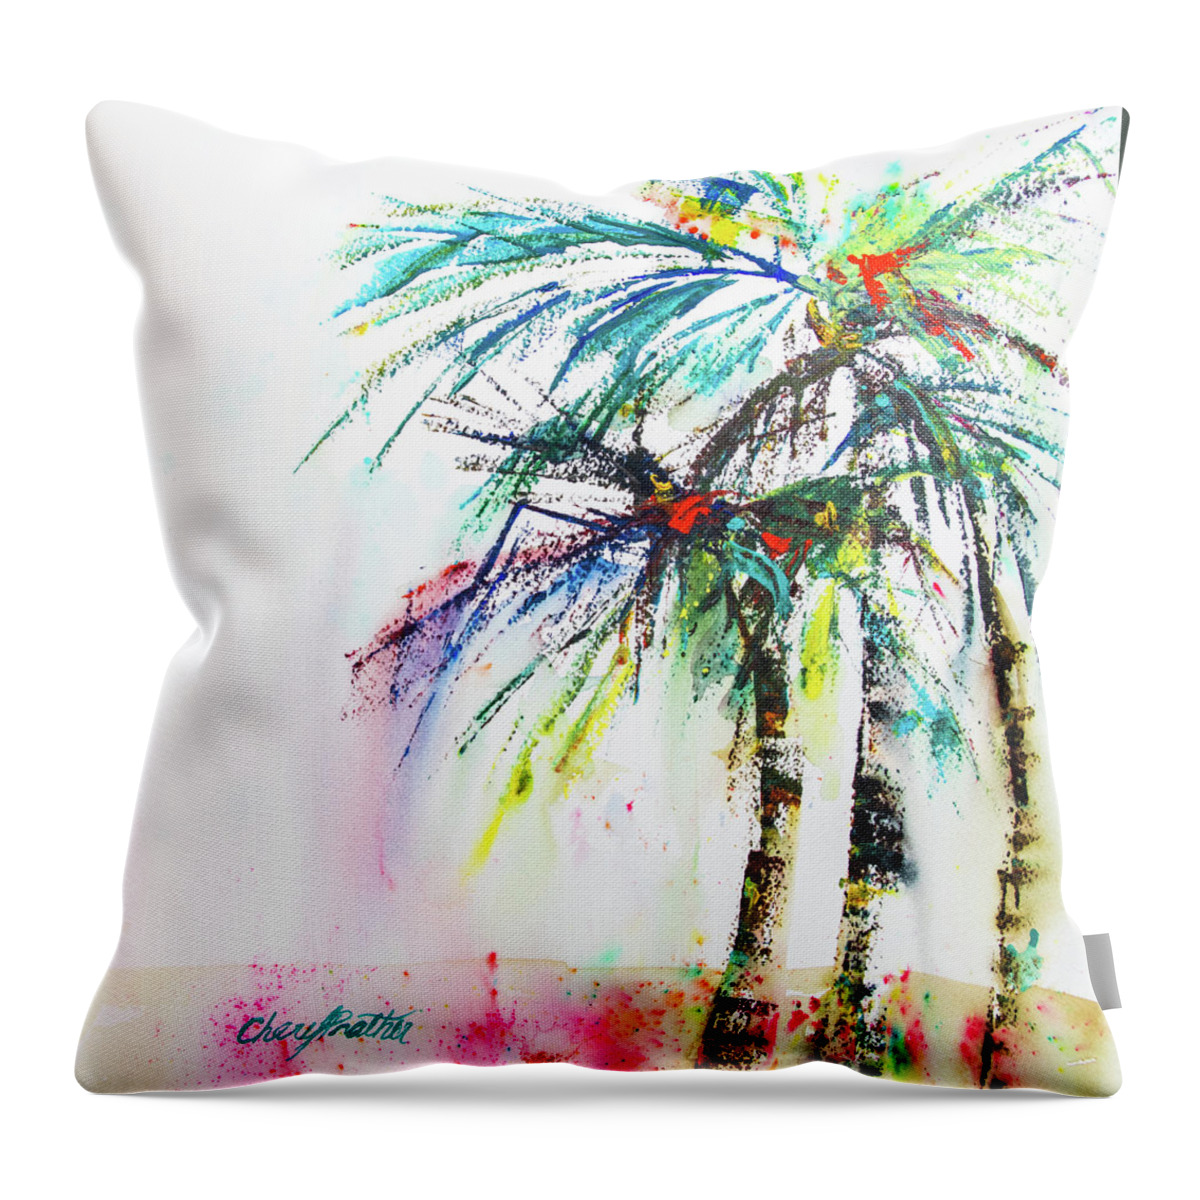 Beach Throw Pillow featuring the painting Three Palms by Cheryl Prather